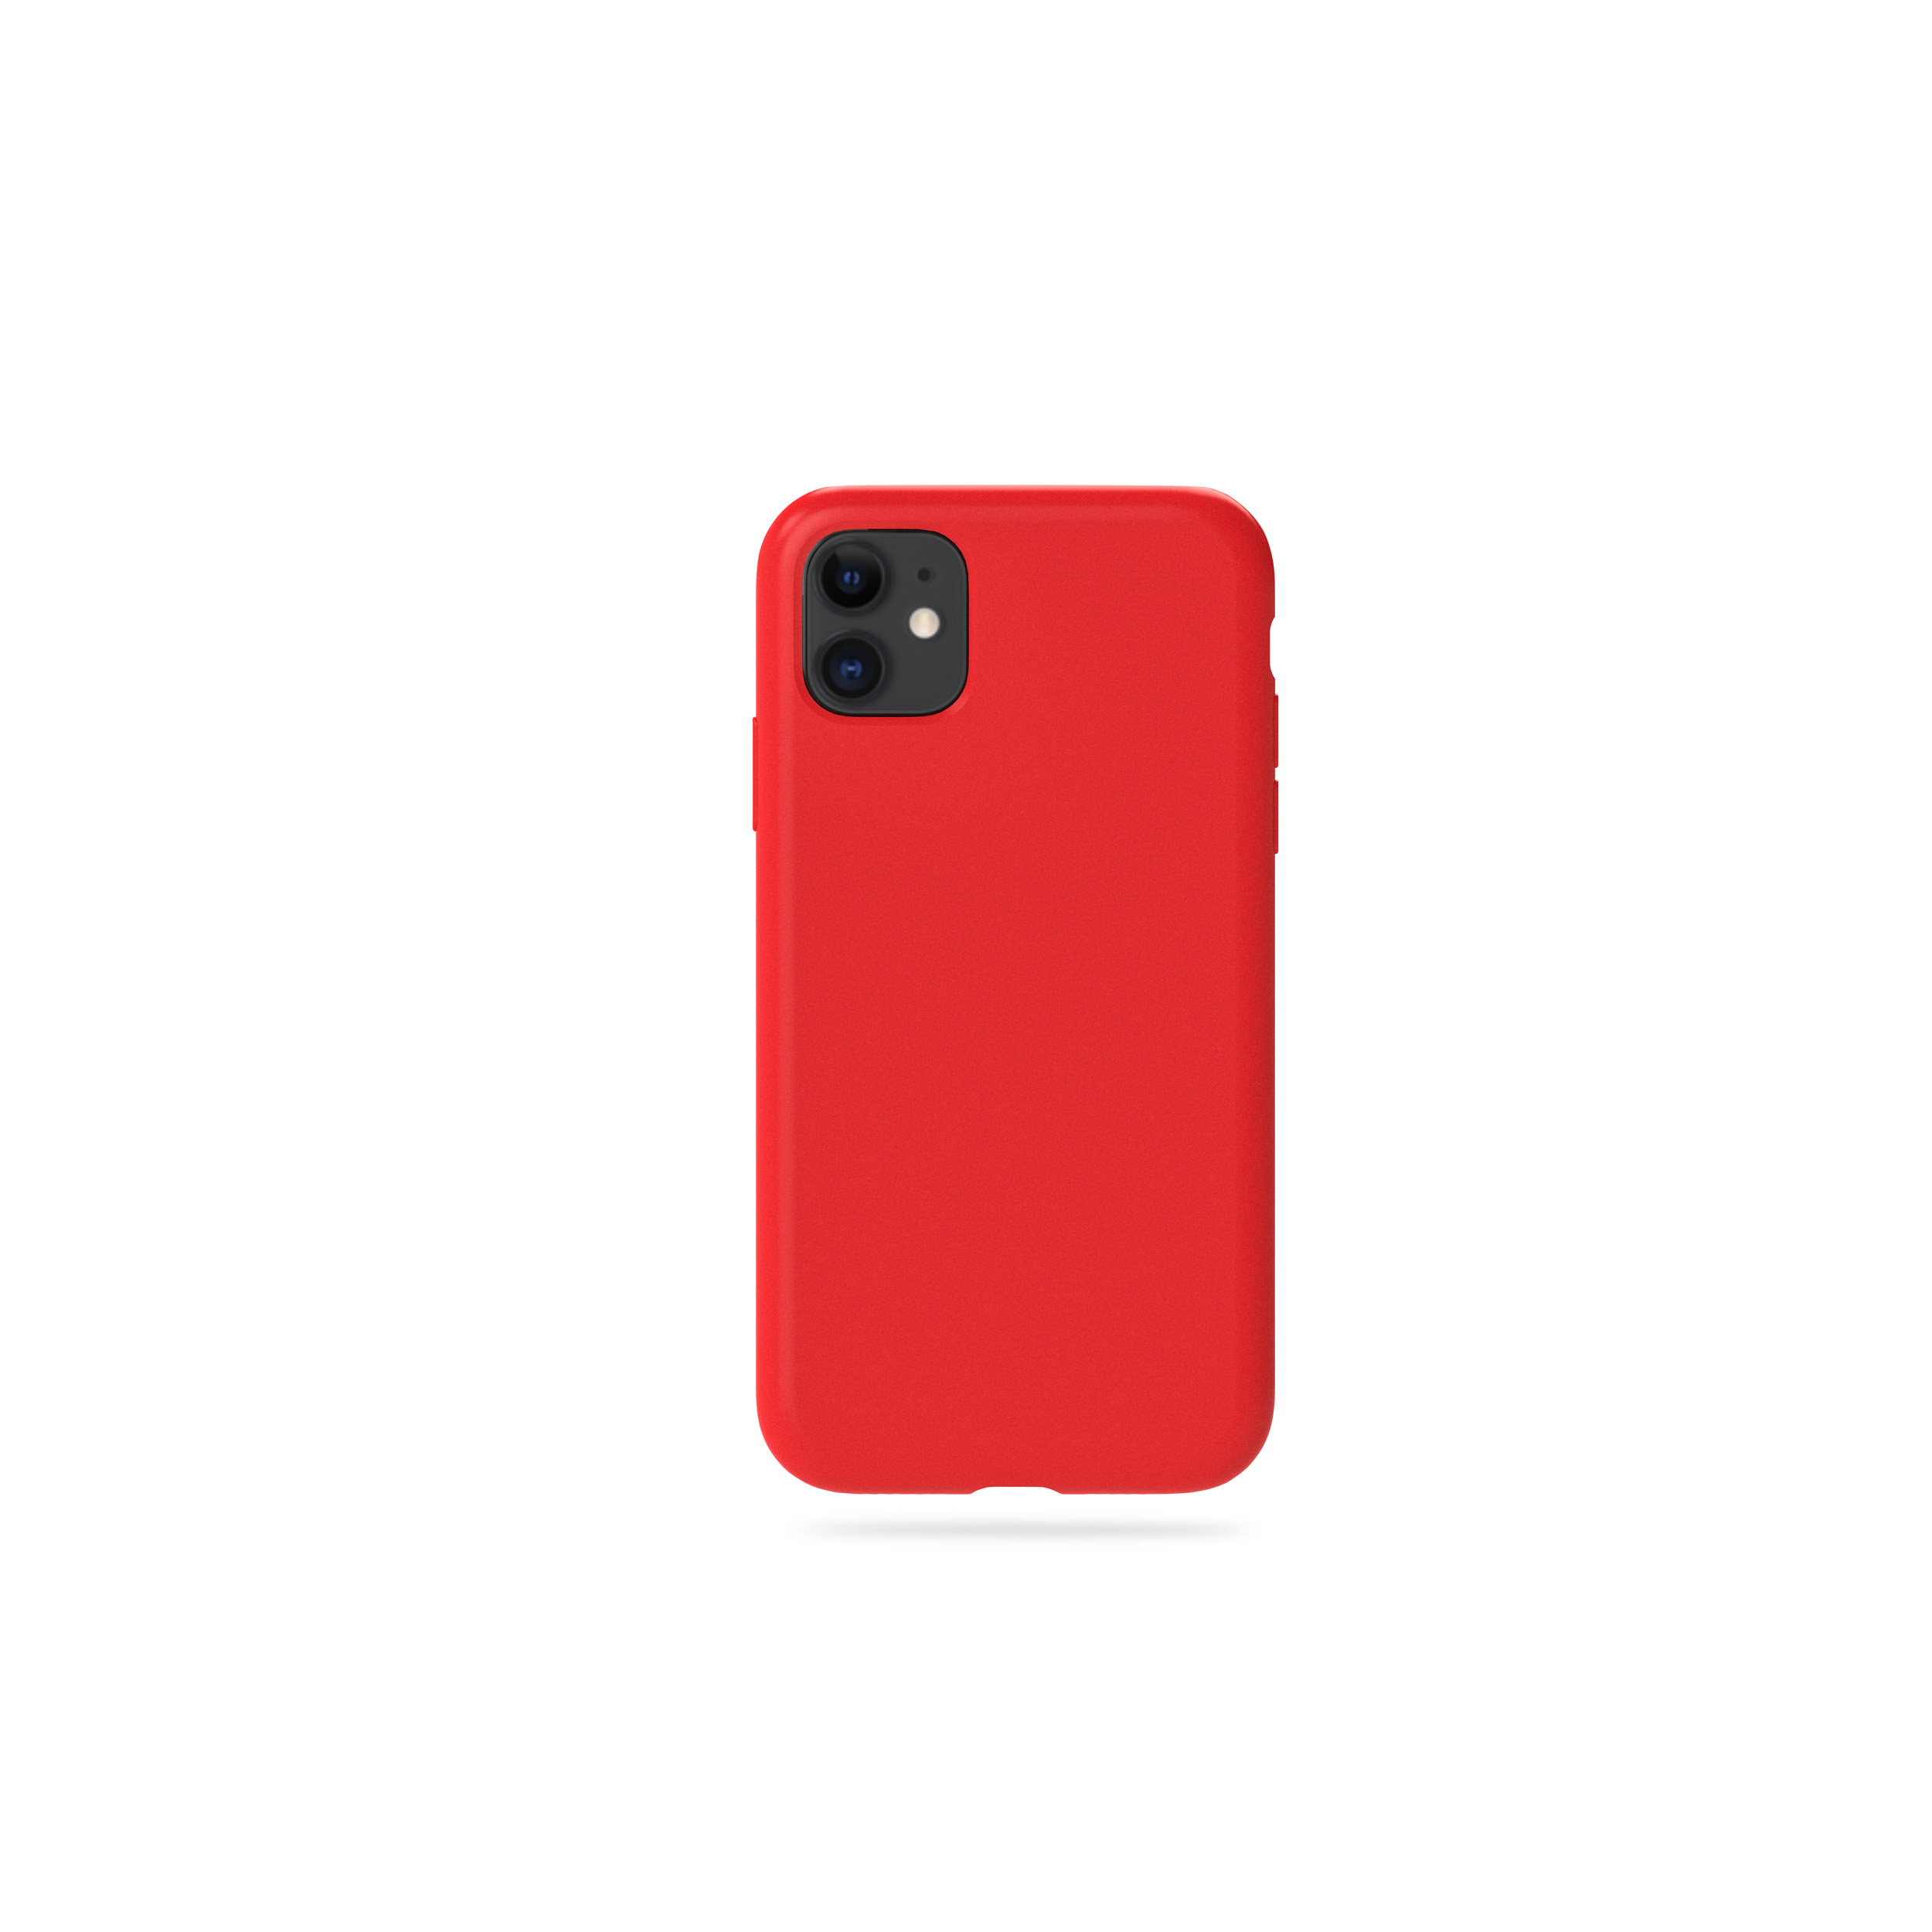 KMP Silikon Schutzhülle iPhone Red, iPhone 11, Apple, Backcover, red 11 für